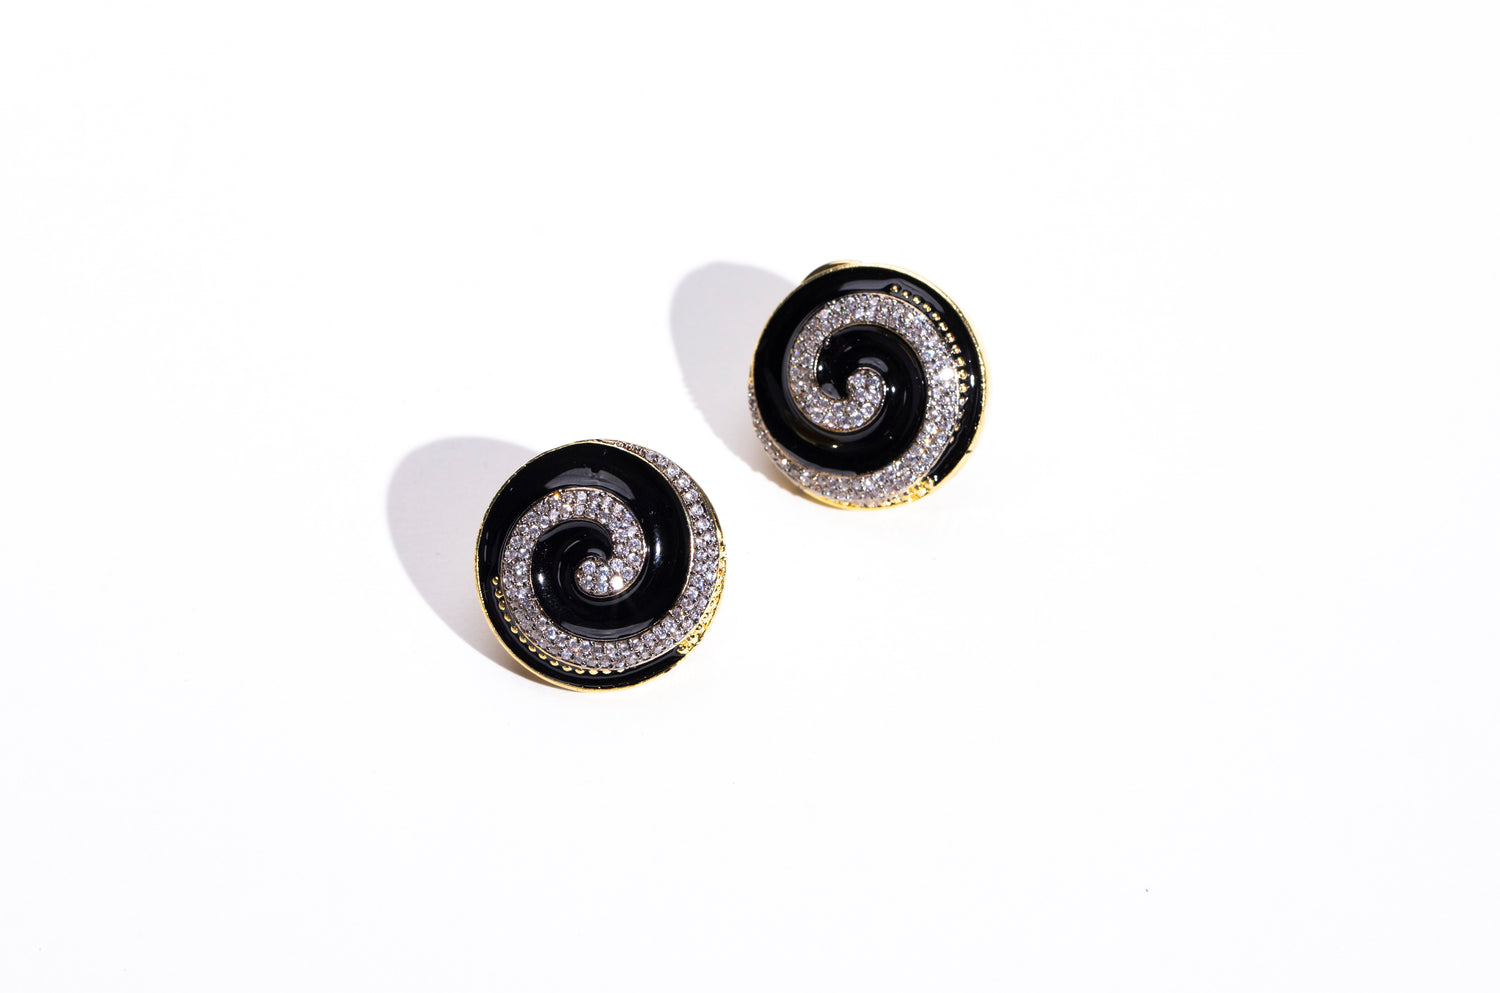 Classic Black Earrings for Cocktail Parties: Elevate your style with these bold and impactful earrings